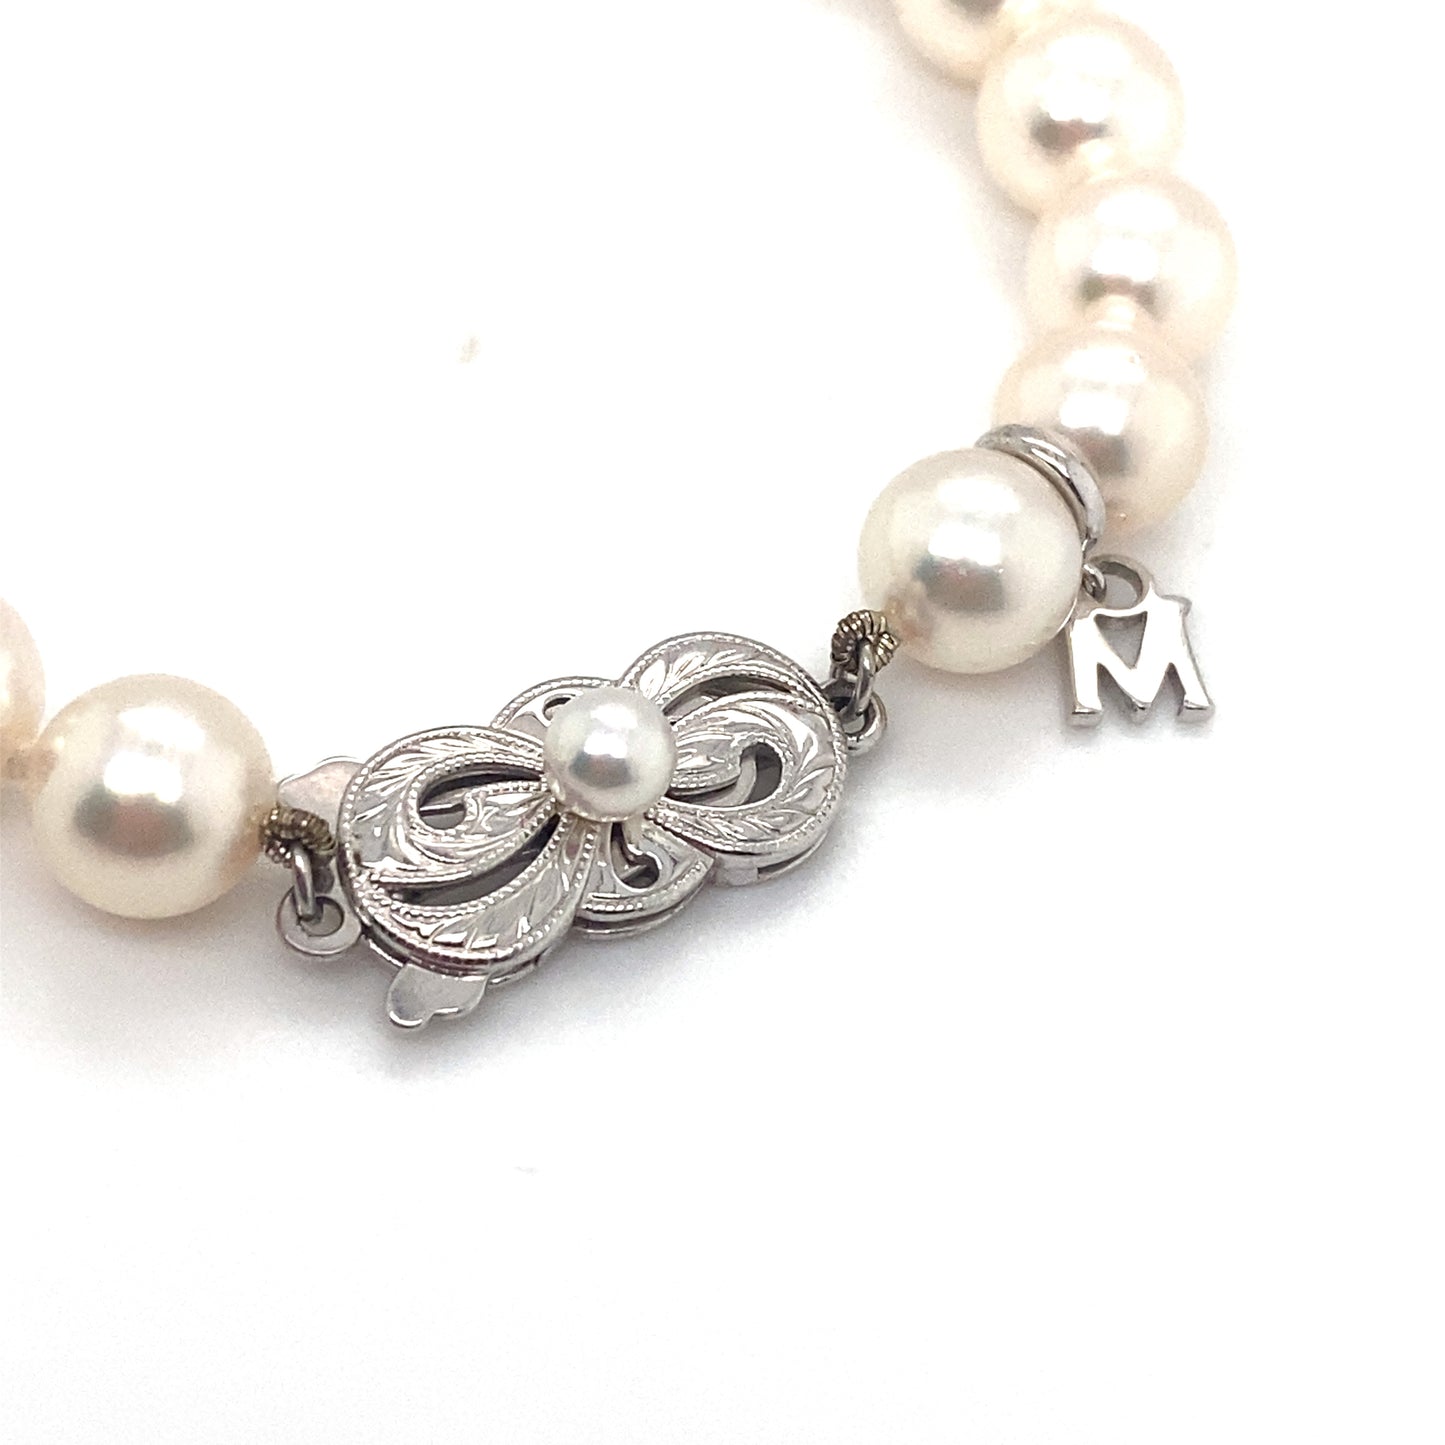 MIKIMOTO Akoya Pearl Bracelet with M Charm with 18K White Gold Clasp